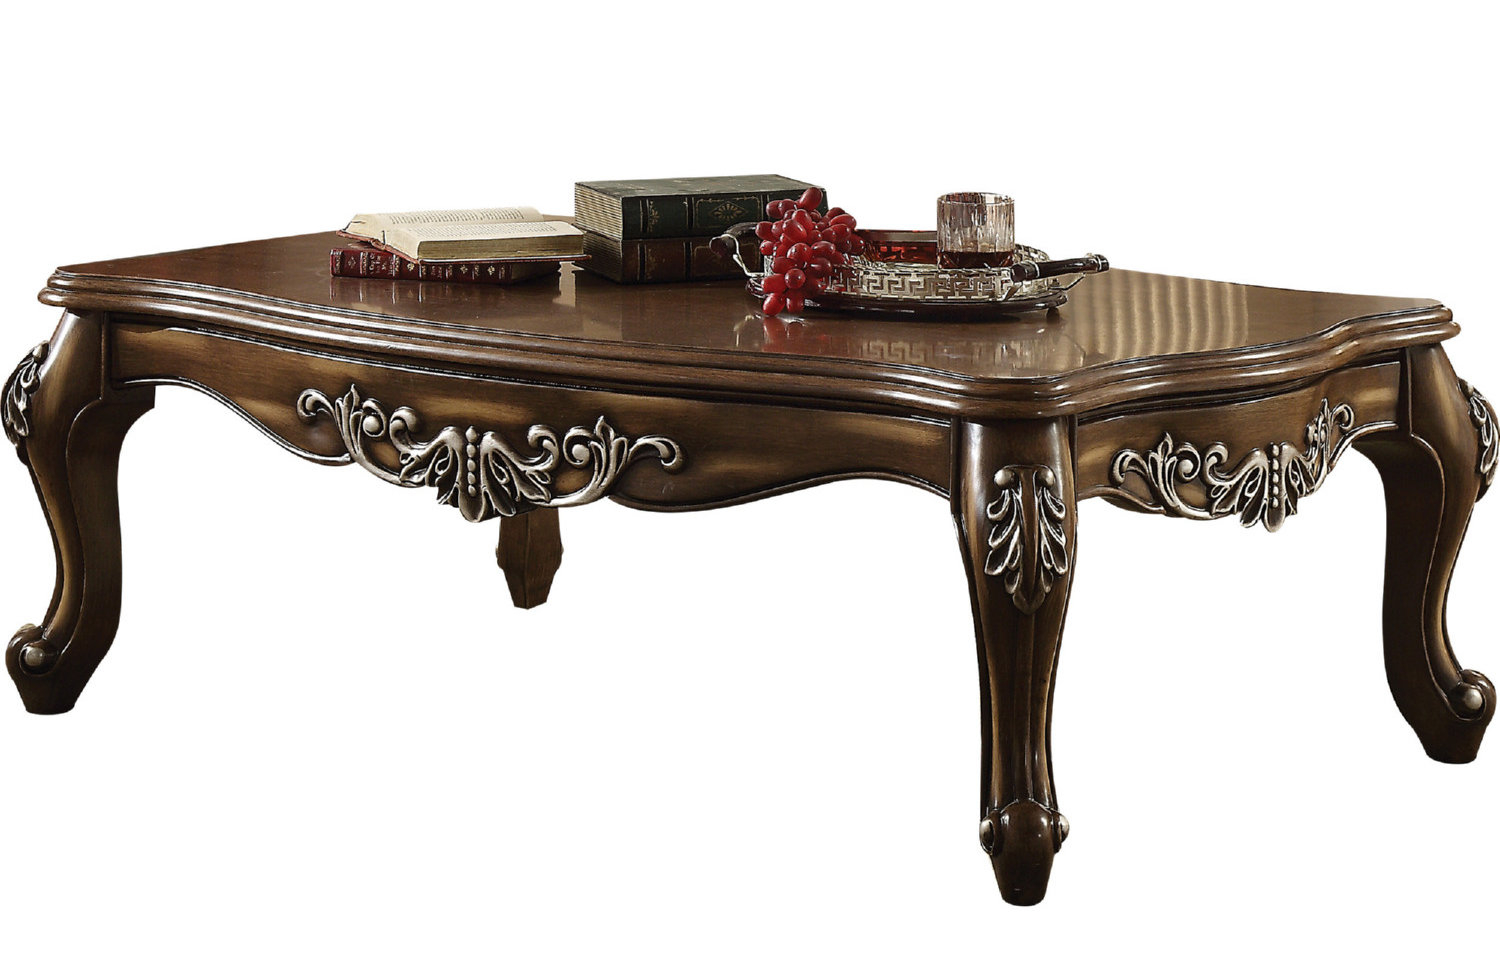 Astoria Grand Jayla Intricately Carved Wooden Coffee Table Wayfair intended for proportions 1500 X 960